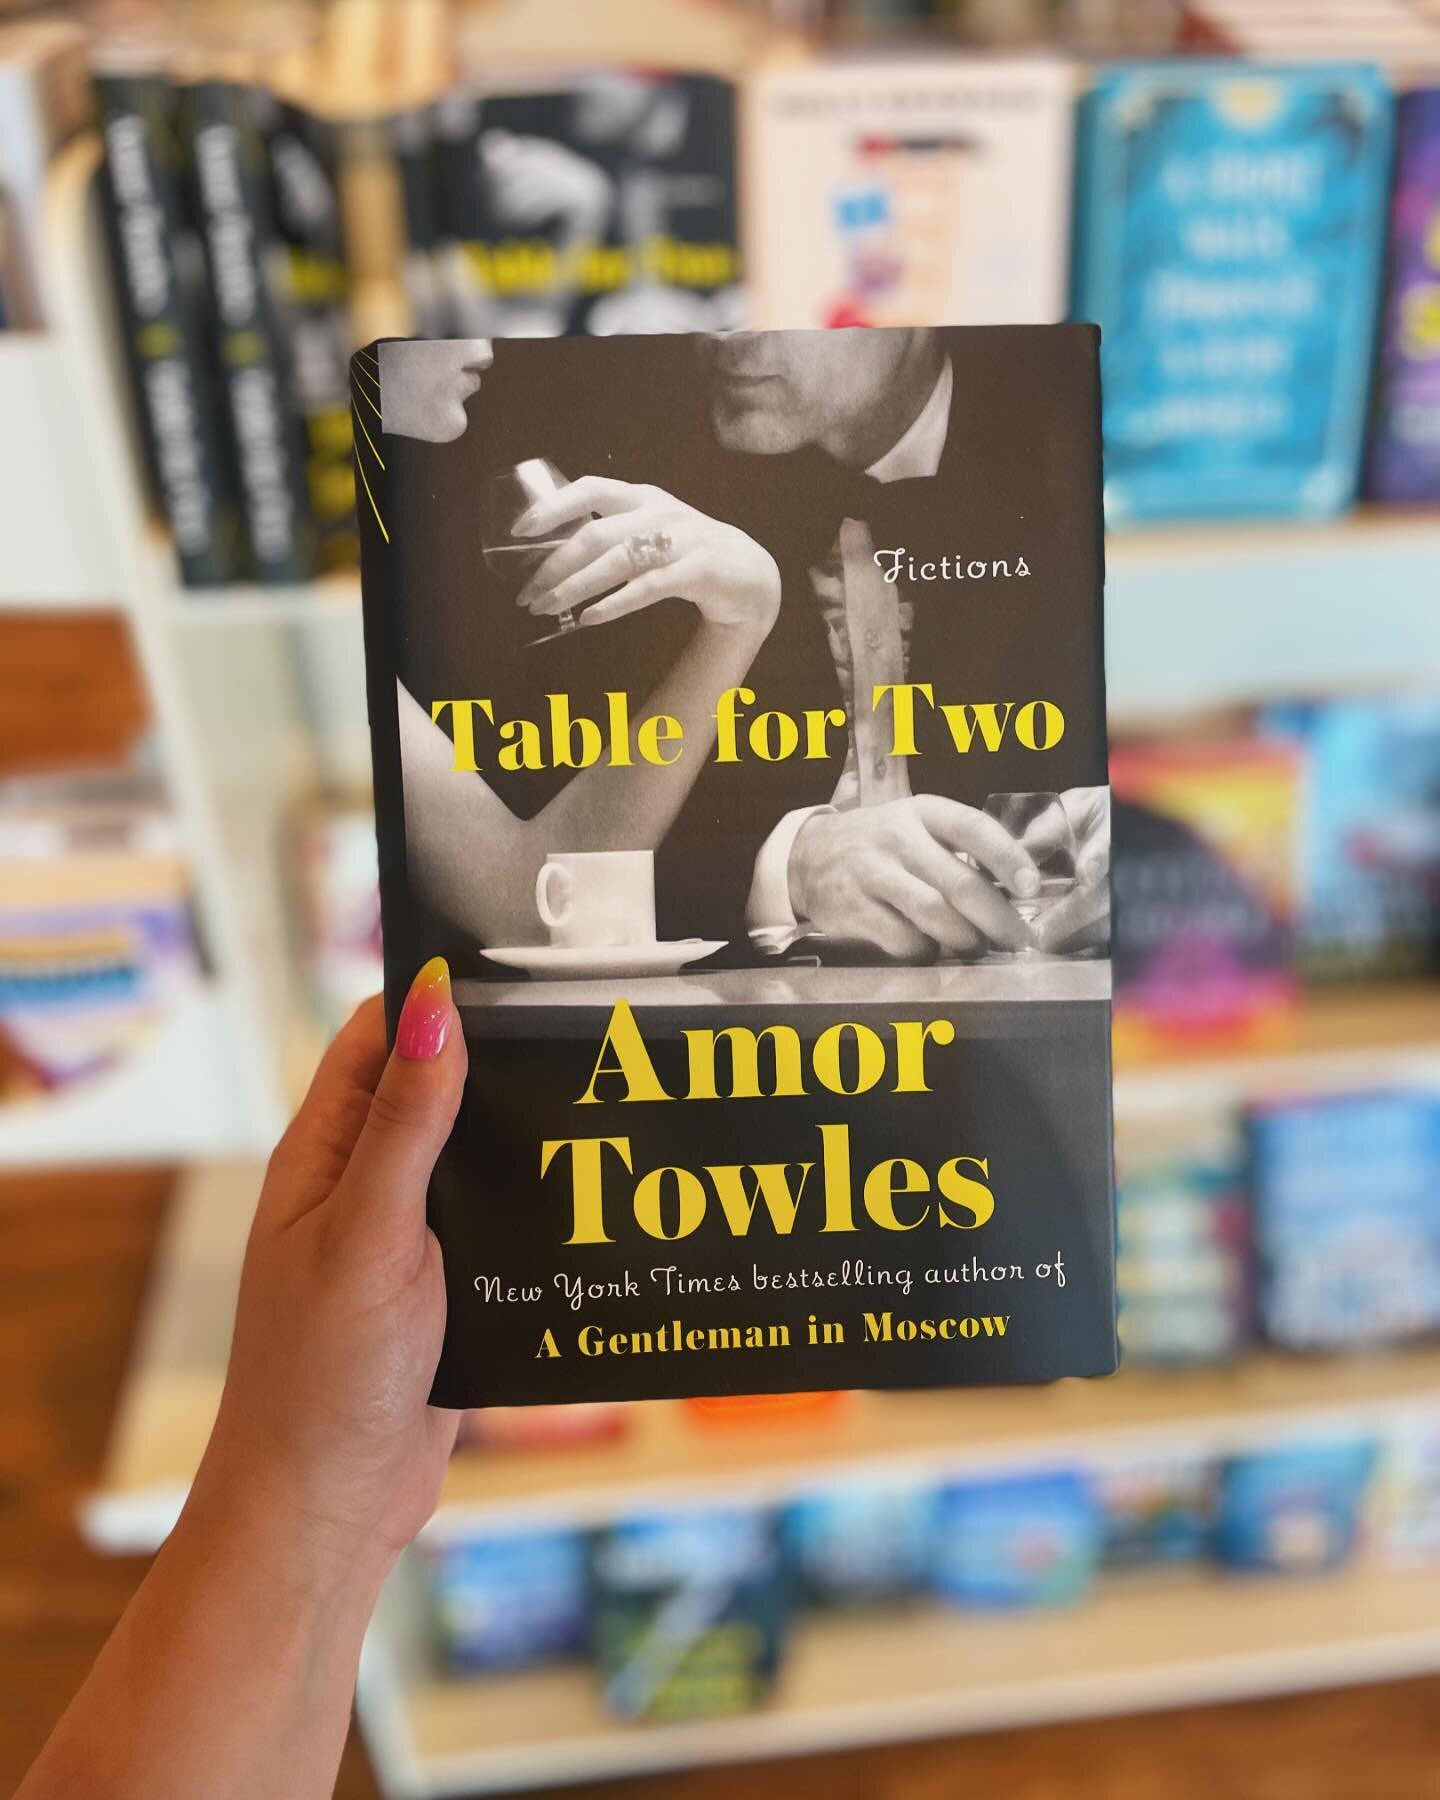 OUT NOW the brand new Amor Towles- TABLE FOR TWO!! 
Come support us today by grabbing your copy now! 

A collection of fiction stories by the exceptional bestselling author of A Gentleman In Moscow. 6 short stories and a novella of Eve from Rules of 